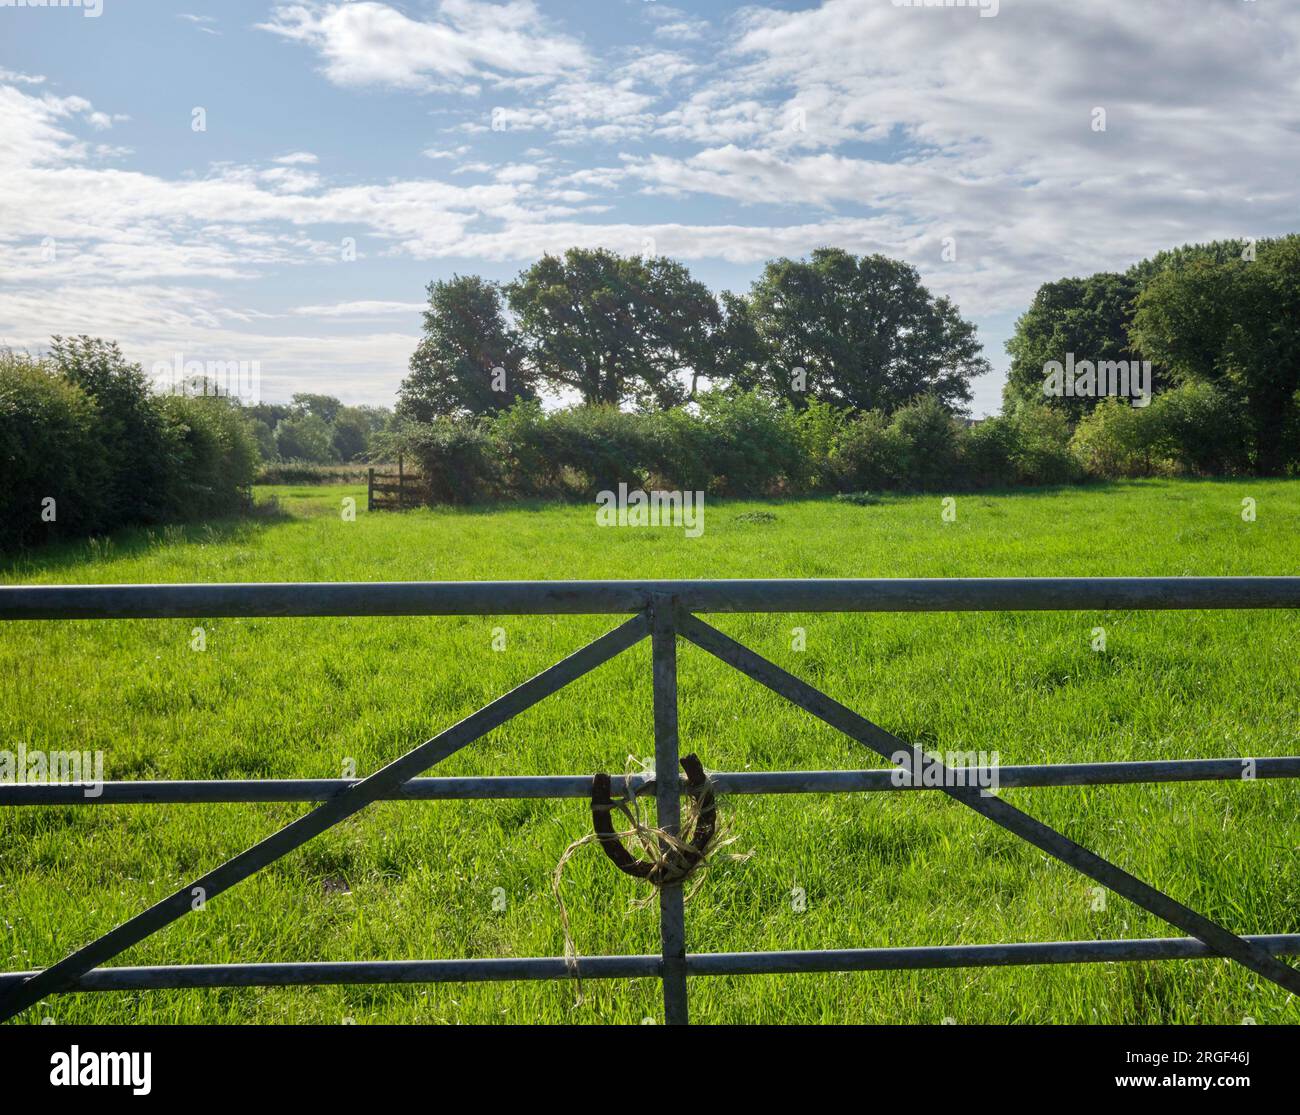 Upturned Horse shoe on a metal gate, Rural community of Womersley, North Yorkshire, northern England, UK Stock Photo